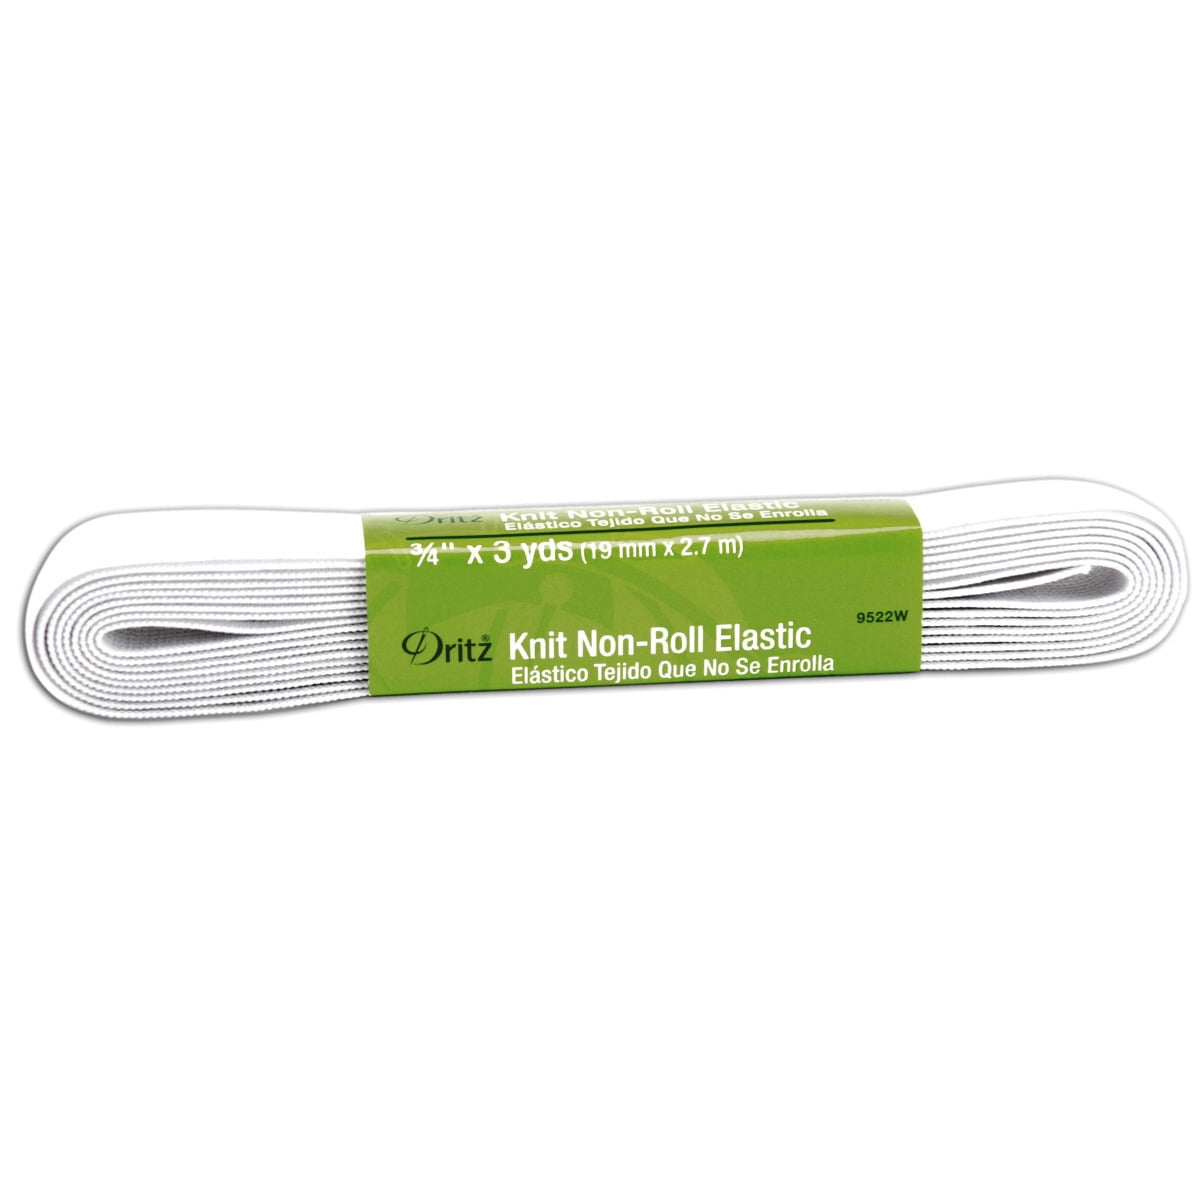 White Dritz 9323W Non-Roll Knit Elastic 1-Inch by 30-Inch 